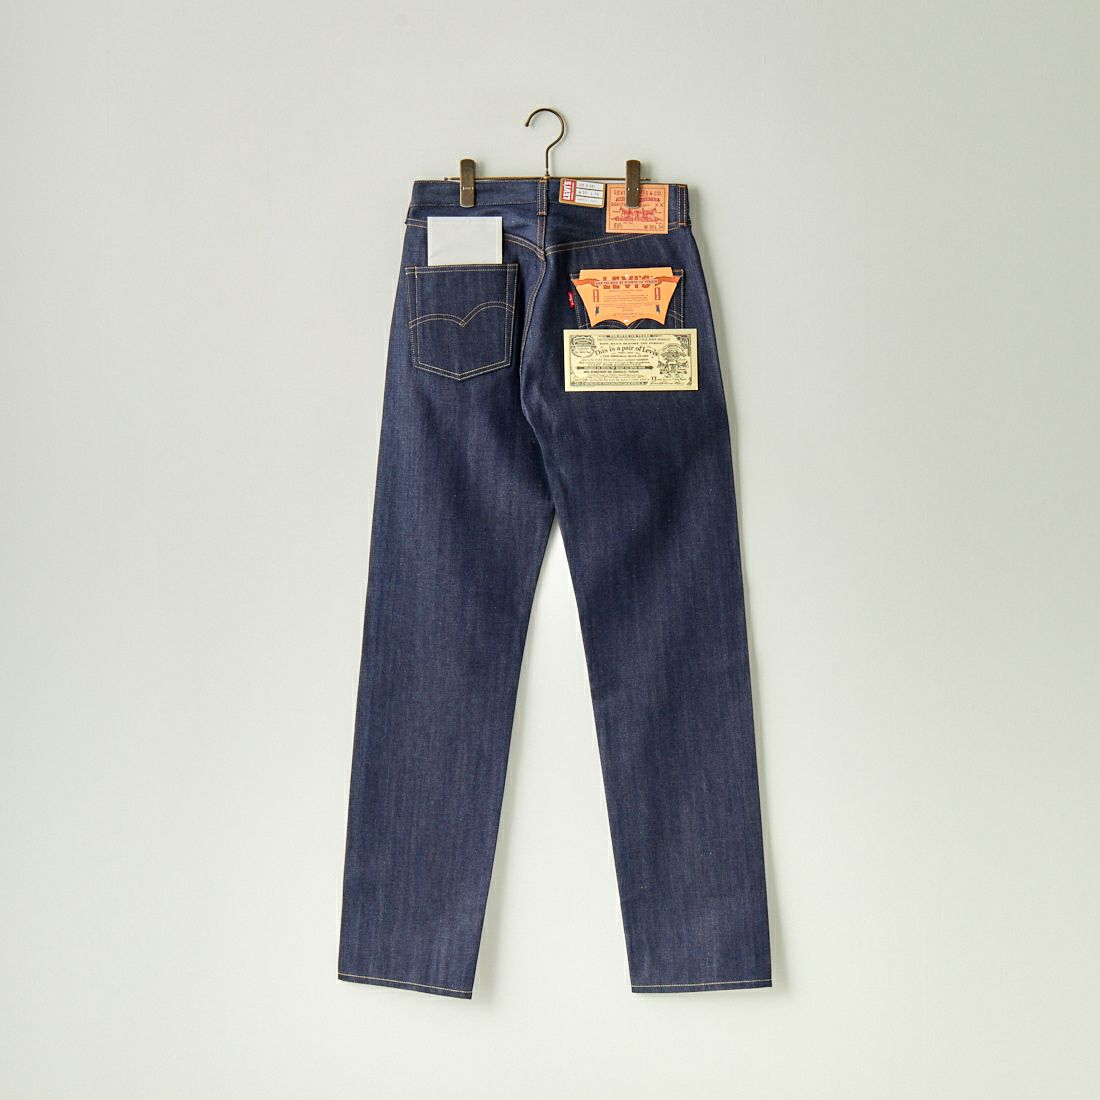 LEVIS Vintage Clothing [リーバイス ヴィンテージ クロージング] 1966 